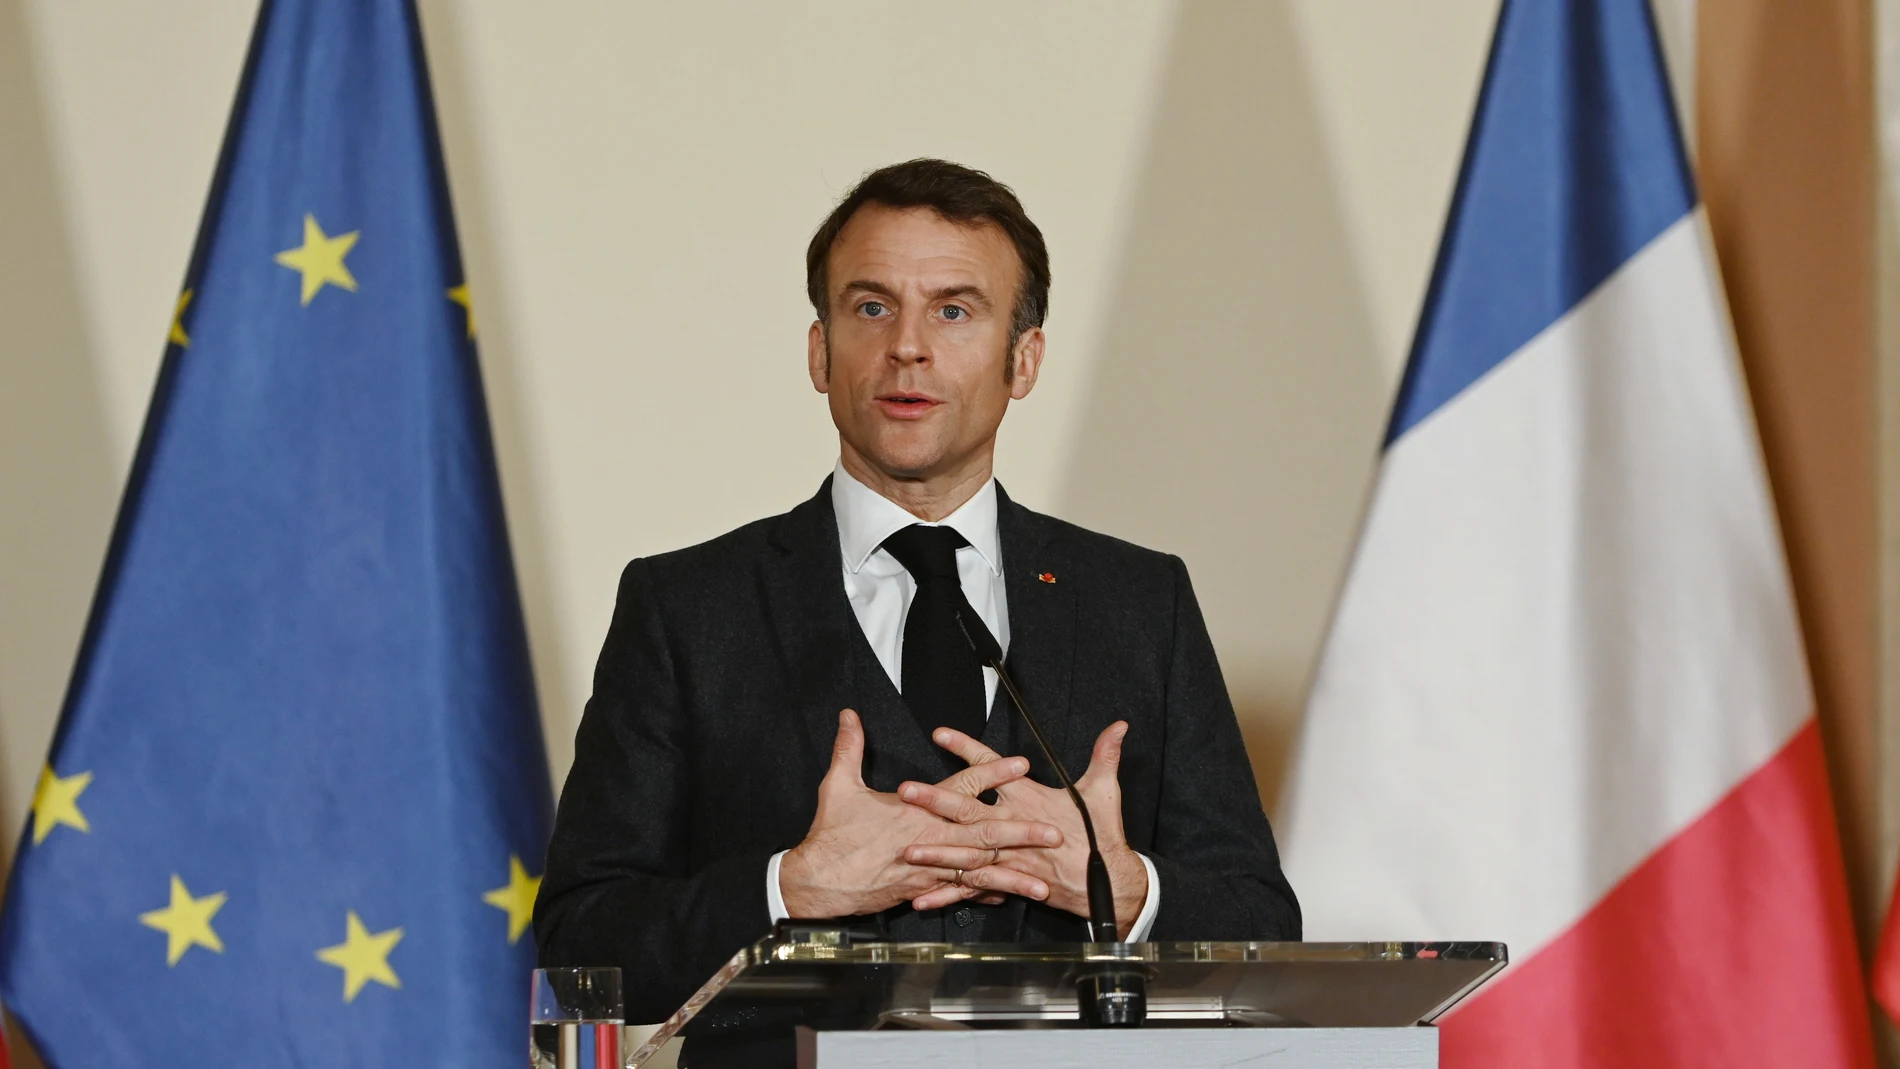 March 5, 2024, Prague, Czech Republic: French president Emmanuel Macron is seen during a joint press conference after meeting with Czech prime minister Petr Fiala (Not in view) in Prague. President of France Emmanuel Macron meets with Prime minister of the Czech Republic during his visit to the Czech Republic. During the meeting, main discussed point are cooperation in defence, energy and Russian aggression in Ukraine.05/03/2024